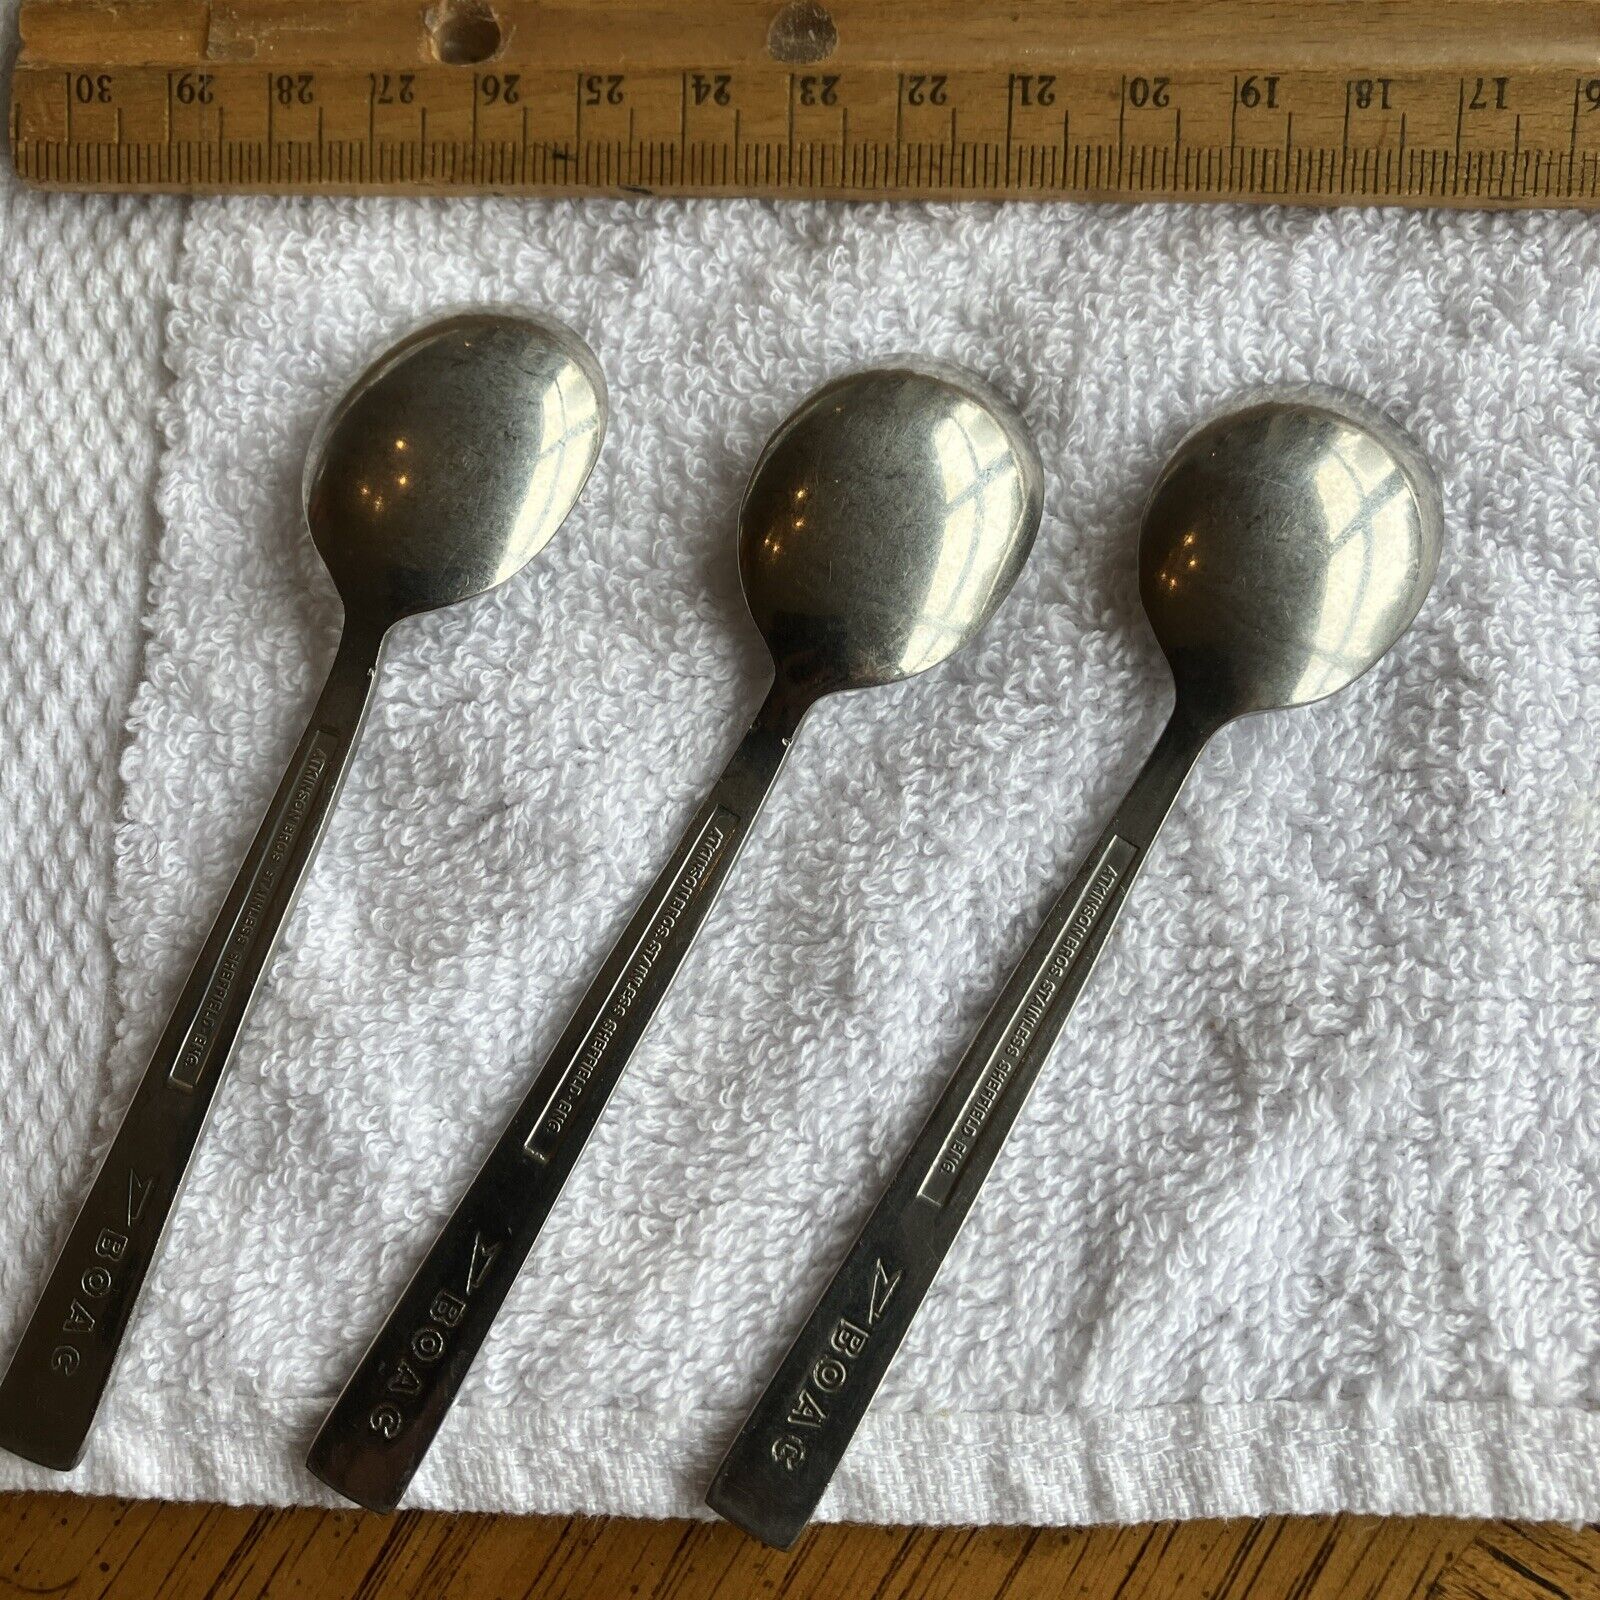 BOAC Airlines Stainless Steel  Spoon Atkinson Sheffield  UK  buy 1, 2 or3